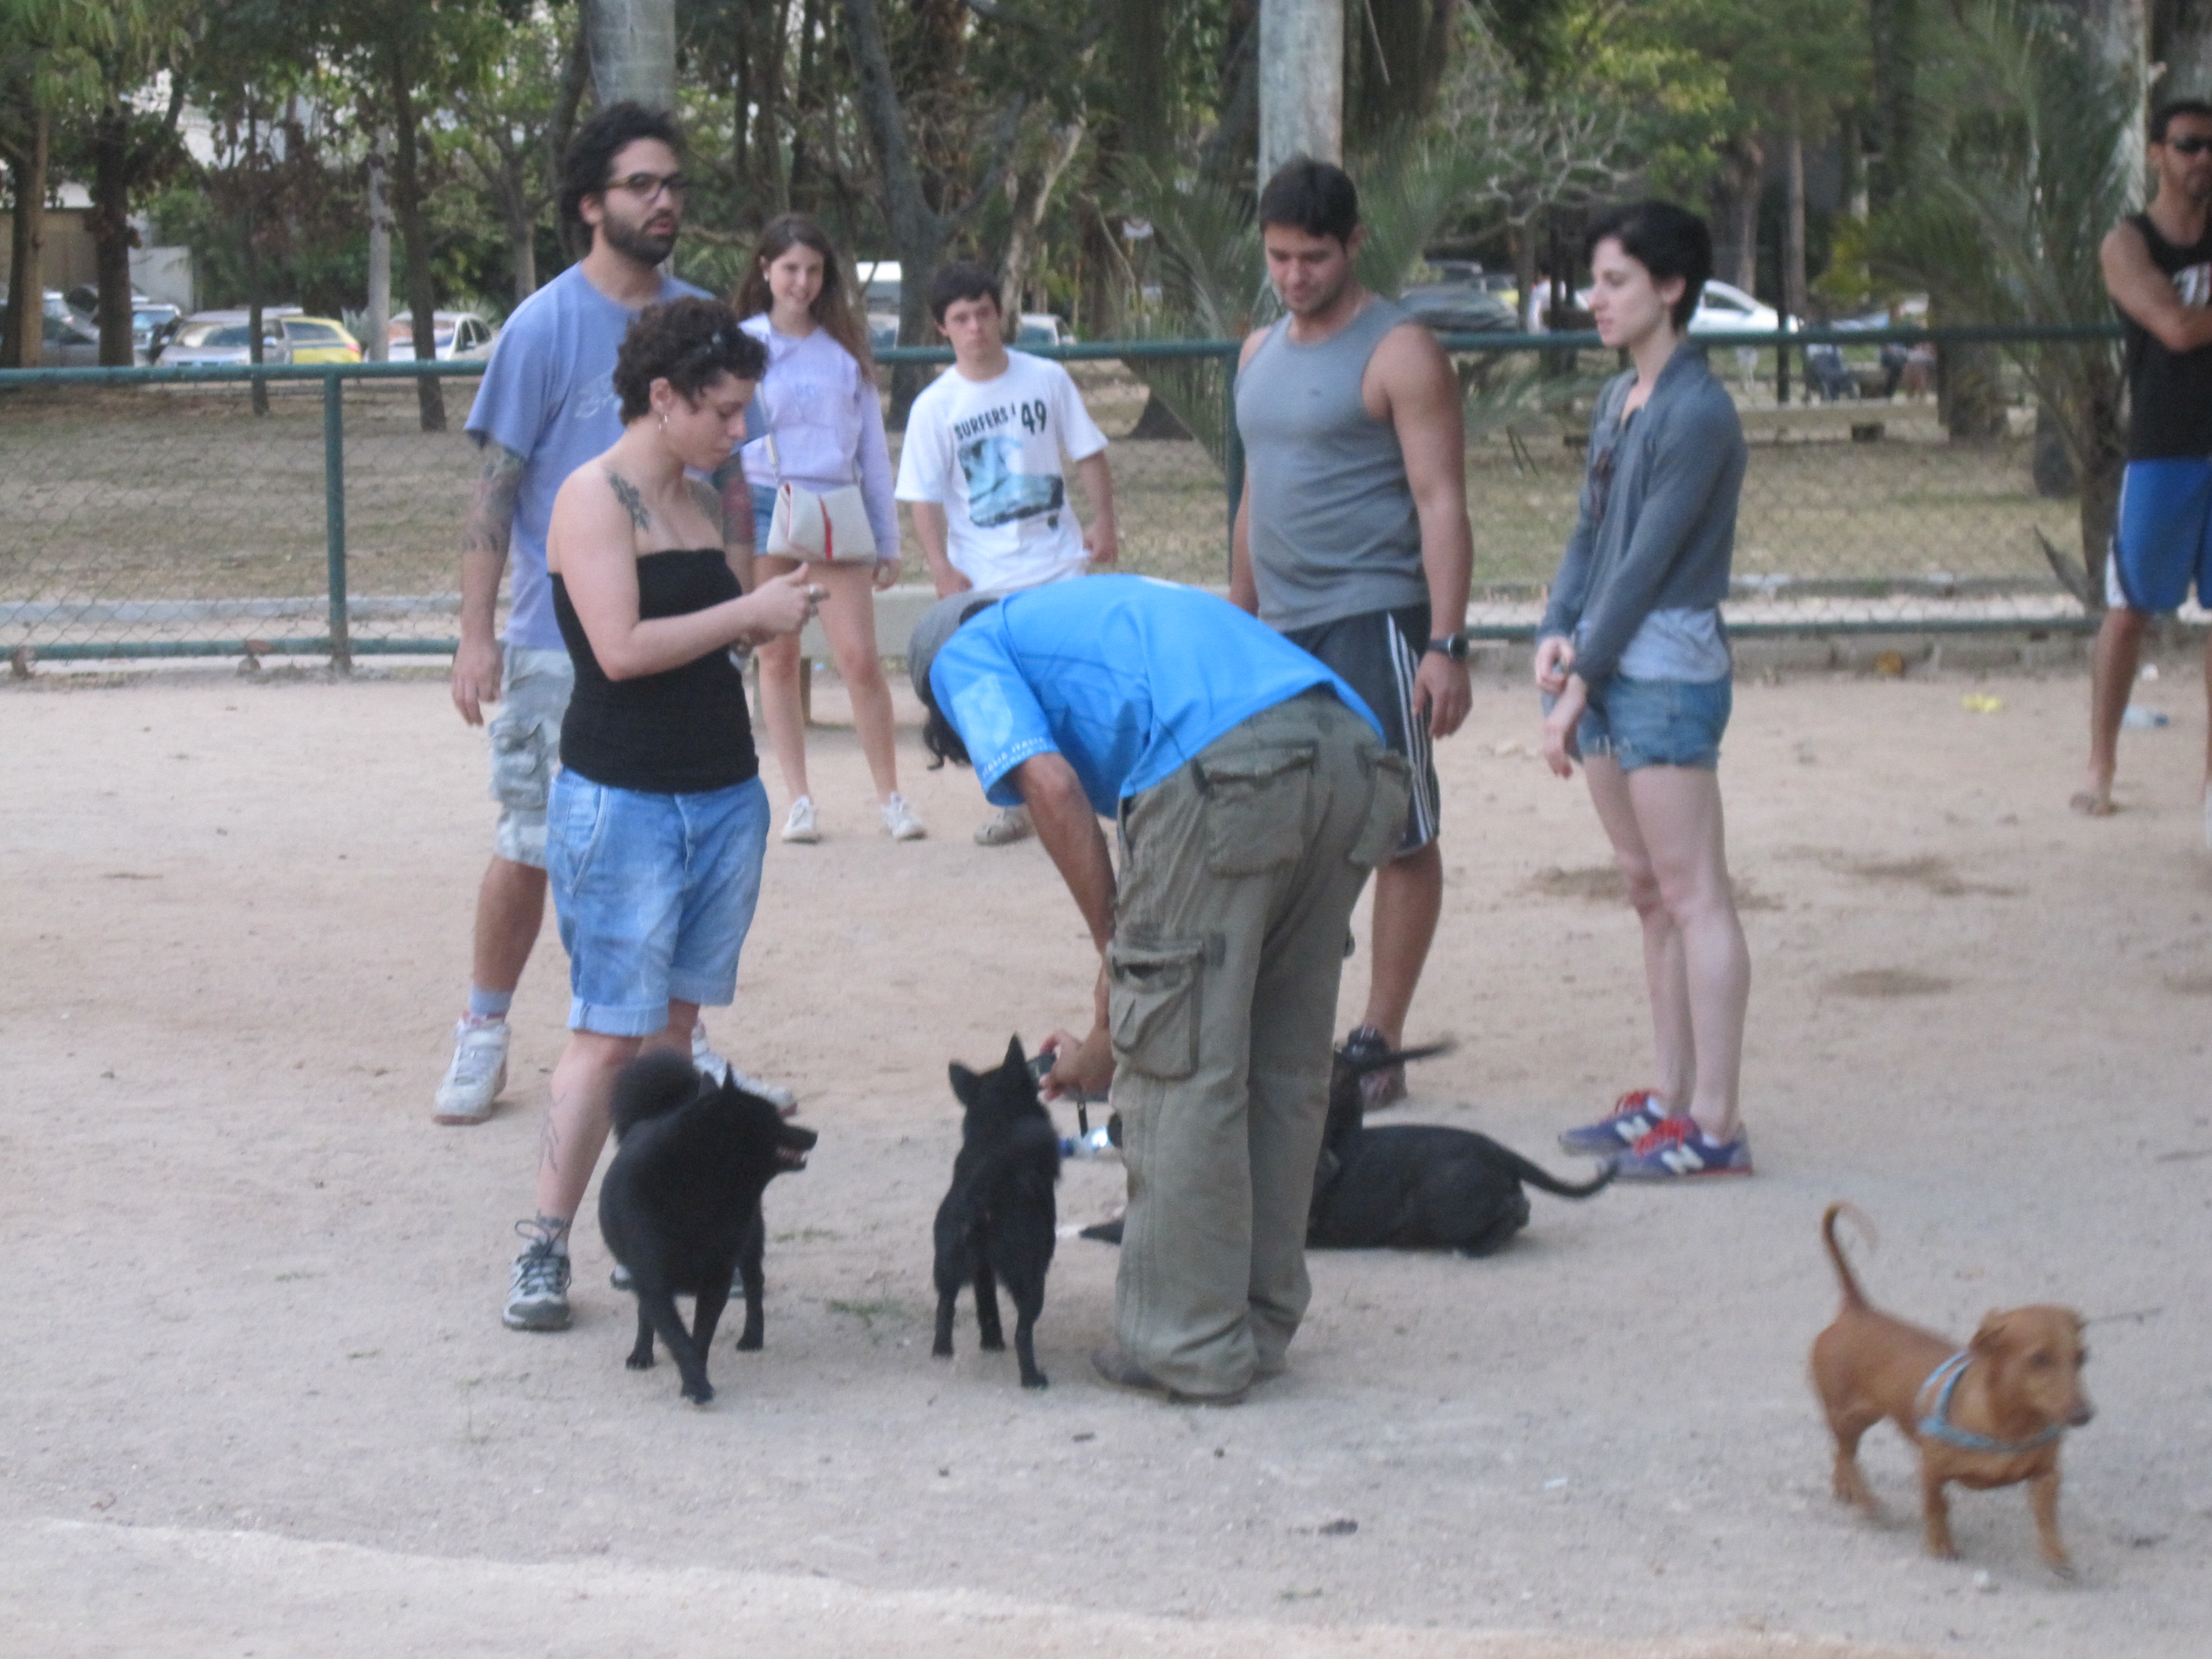 The Parcão da Lagoa dog Park, also on the Lagoa is the ideal place for dogs and owners to socialise, Rio de Janeiro, Brazil, News.